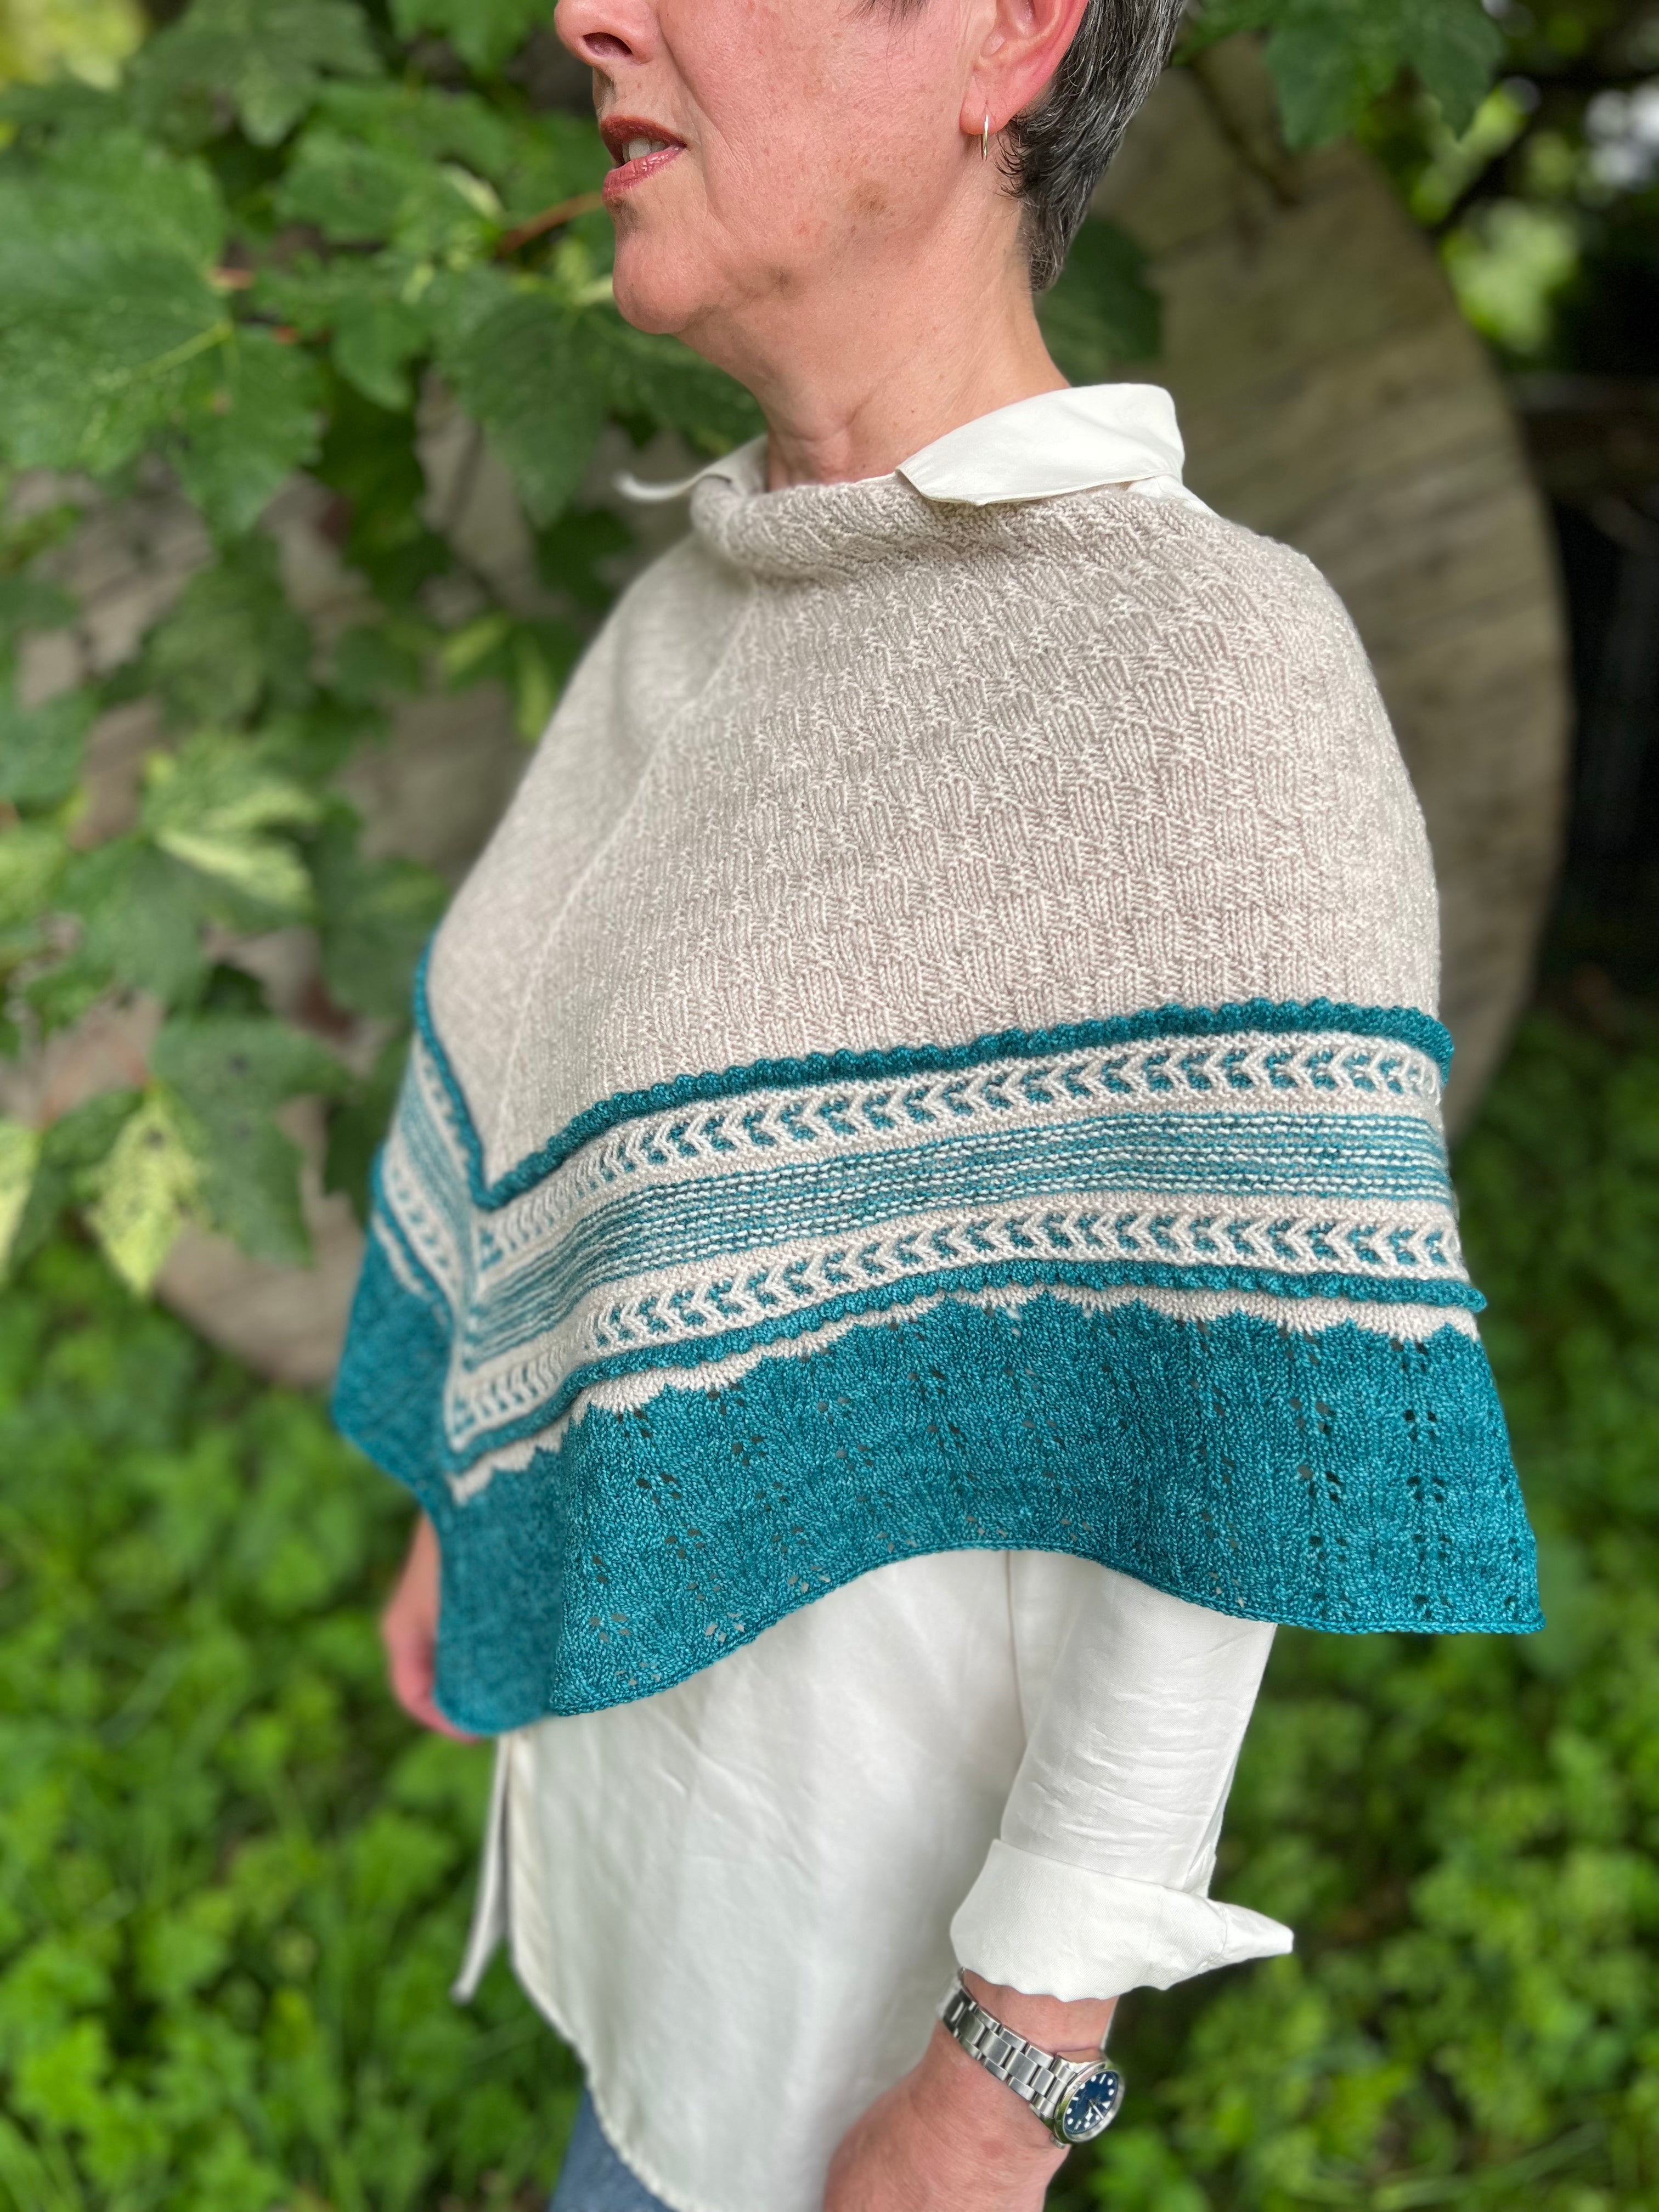 Salvia Sollys Shawl kit by Twinset & Purl